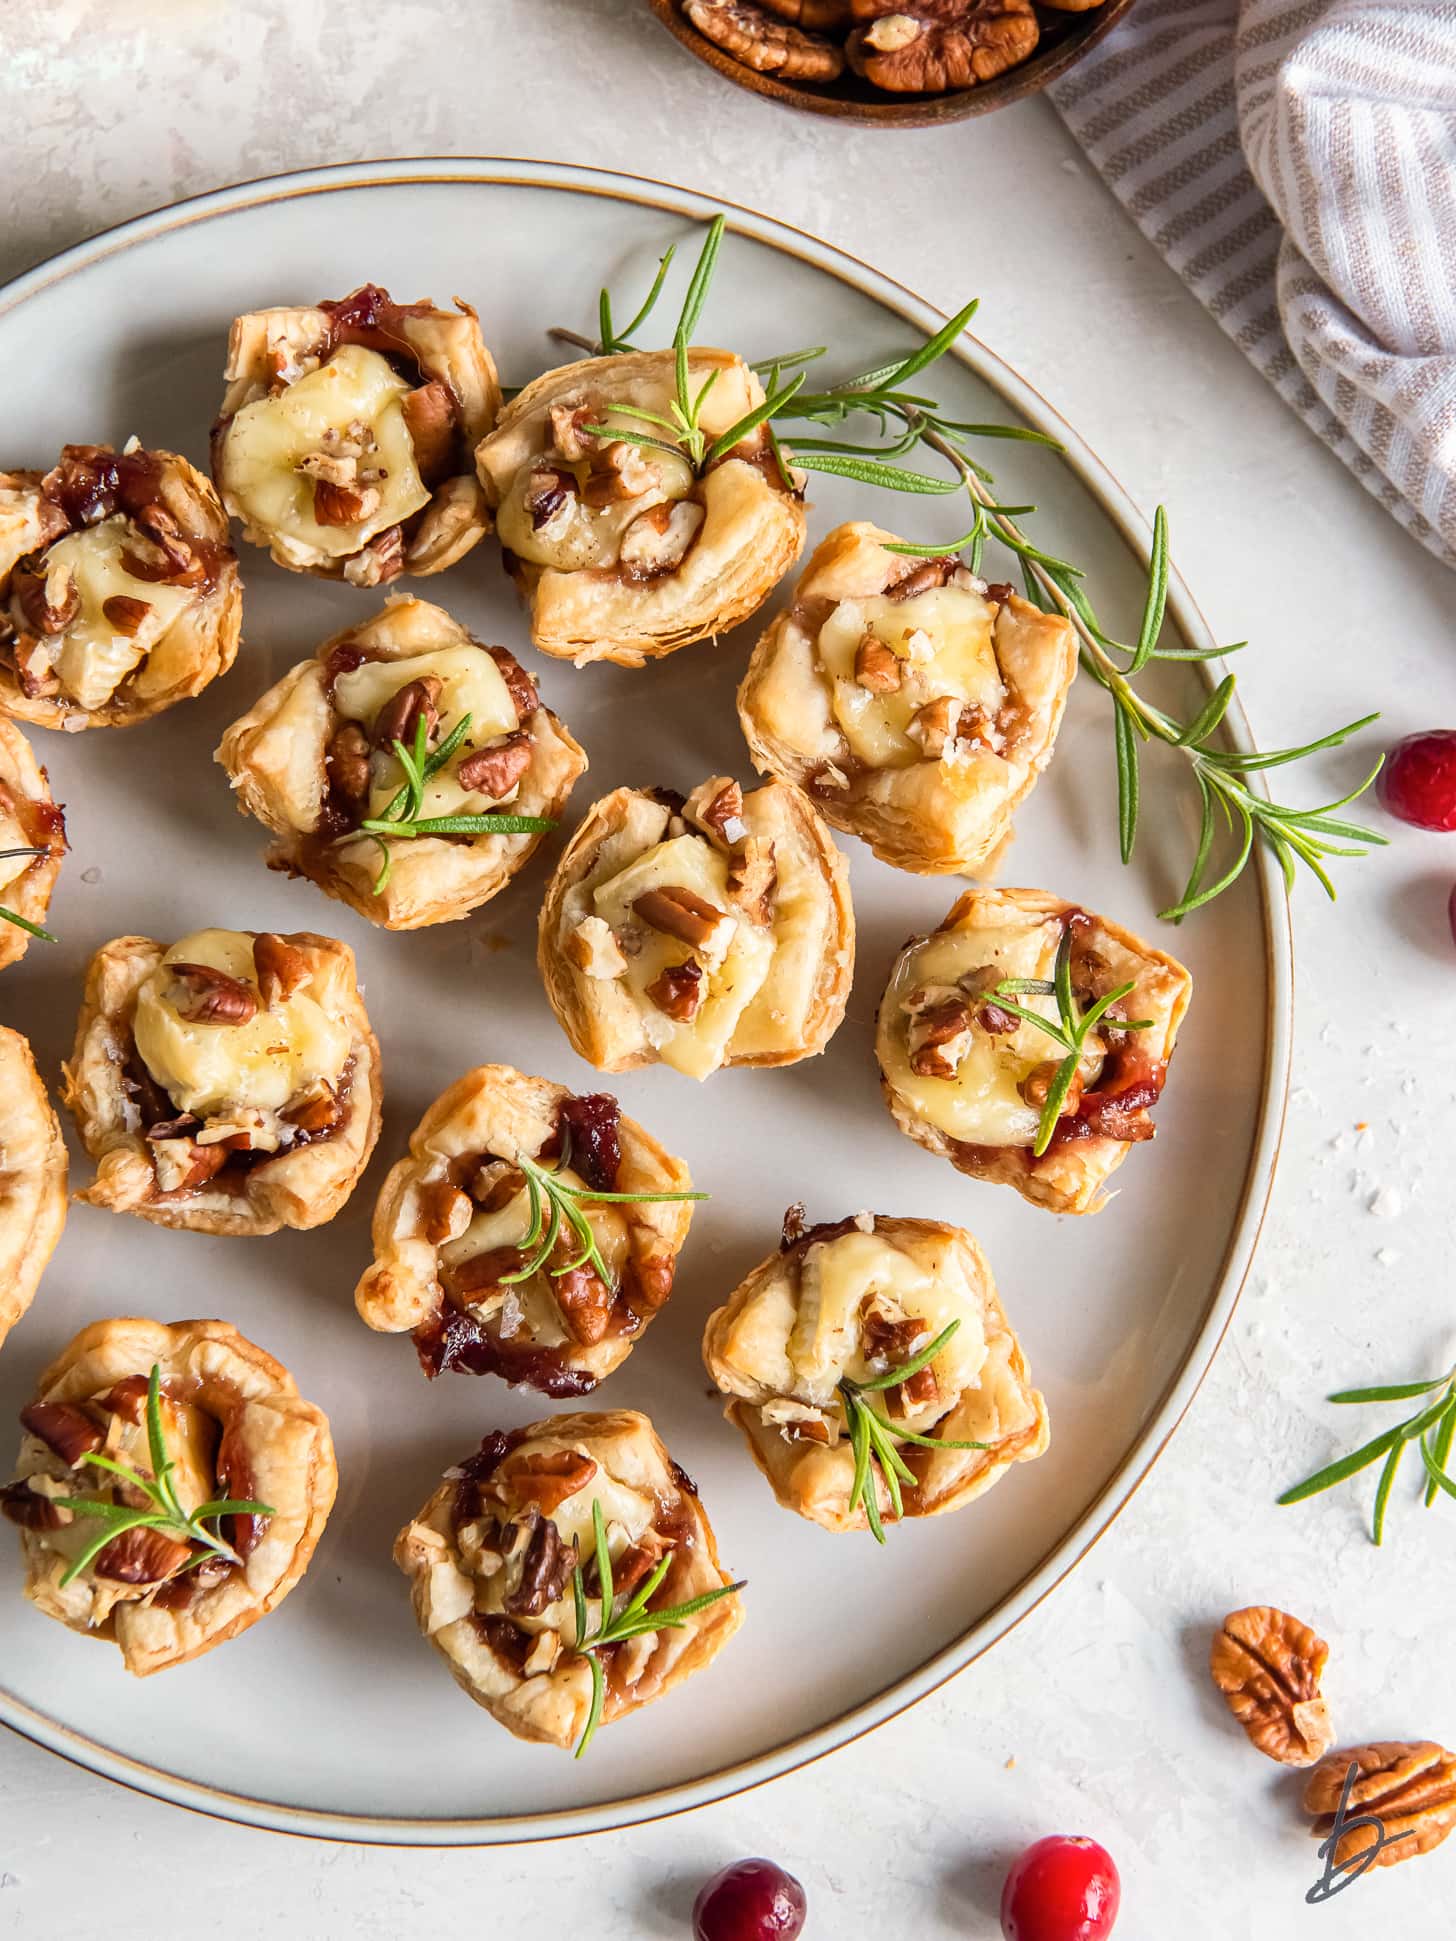 plate of cranberry brie bites with pecans and rosemary garnish.